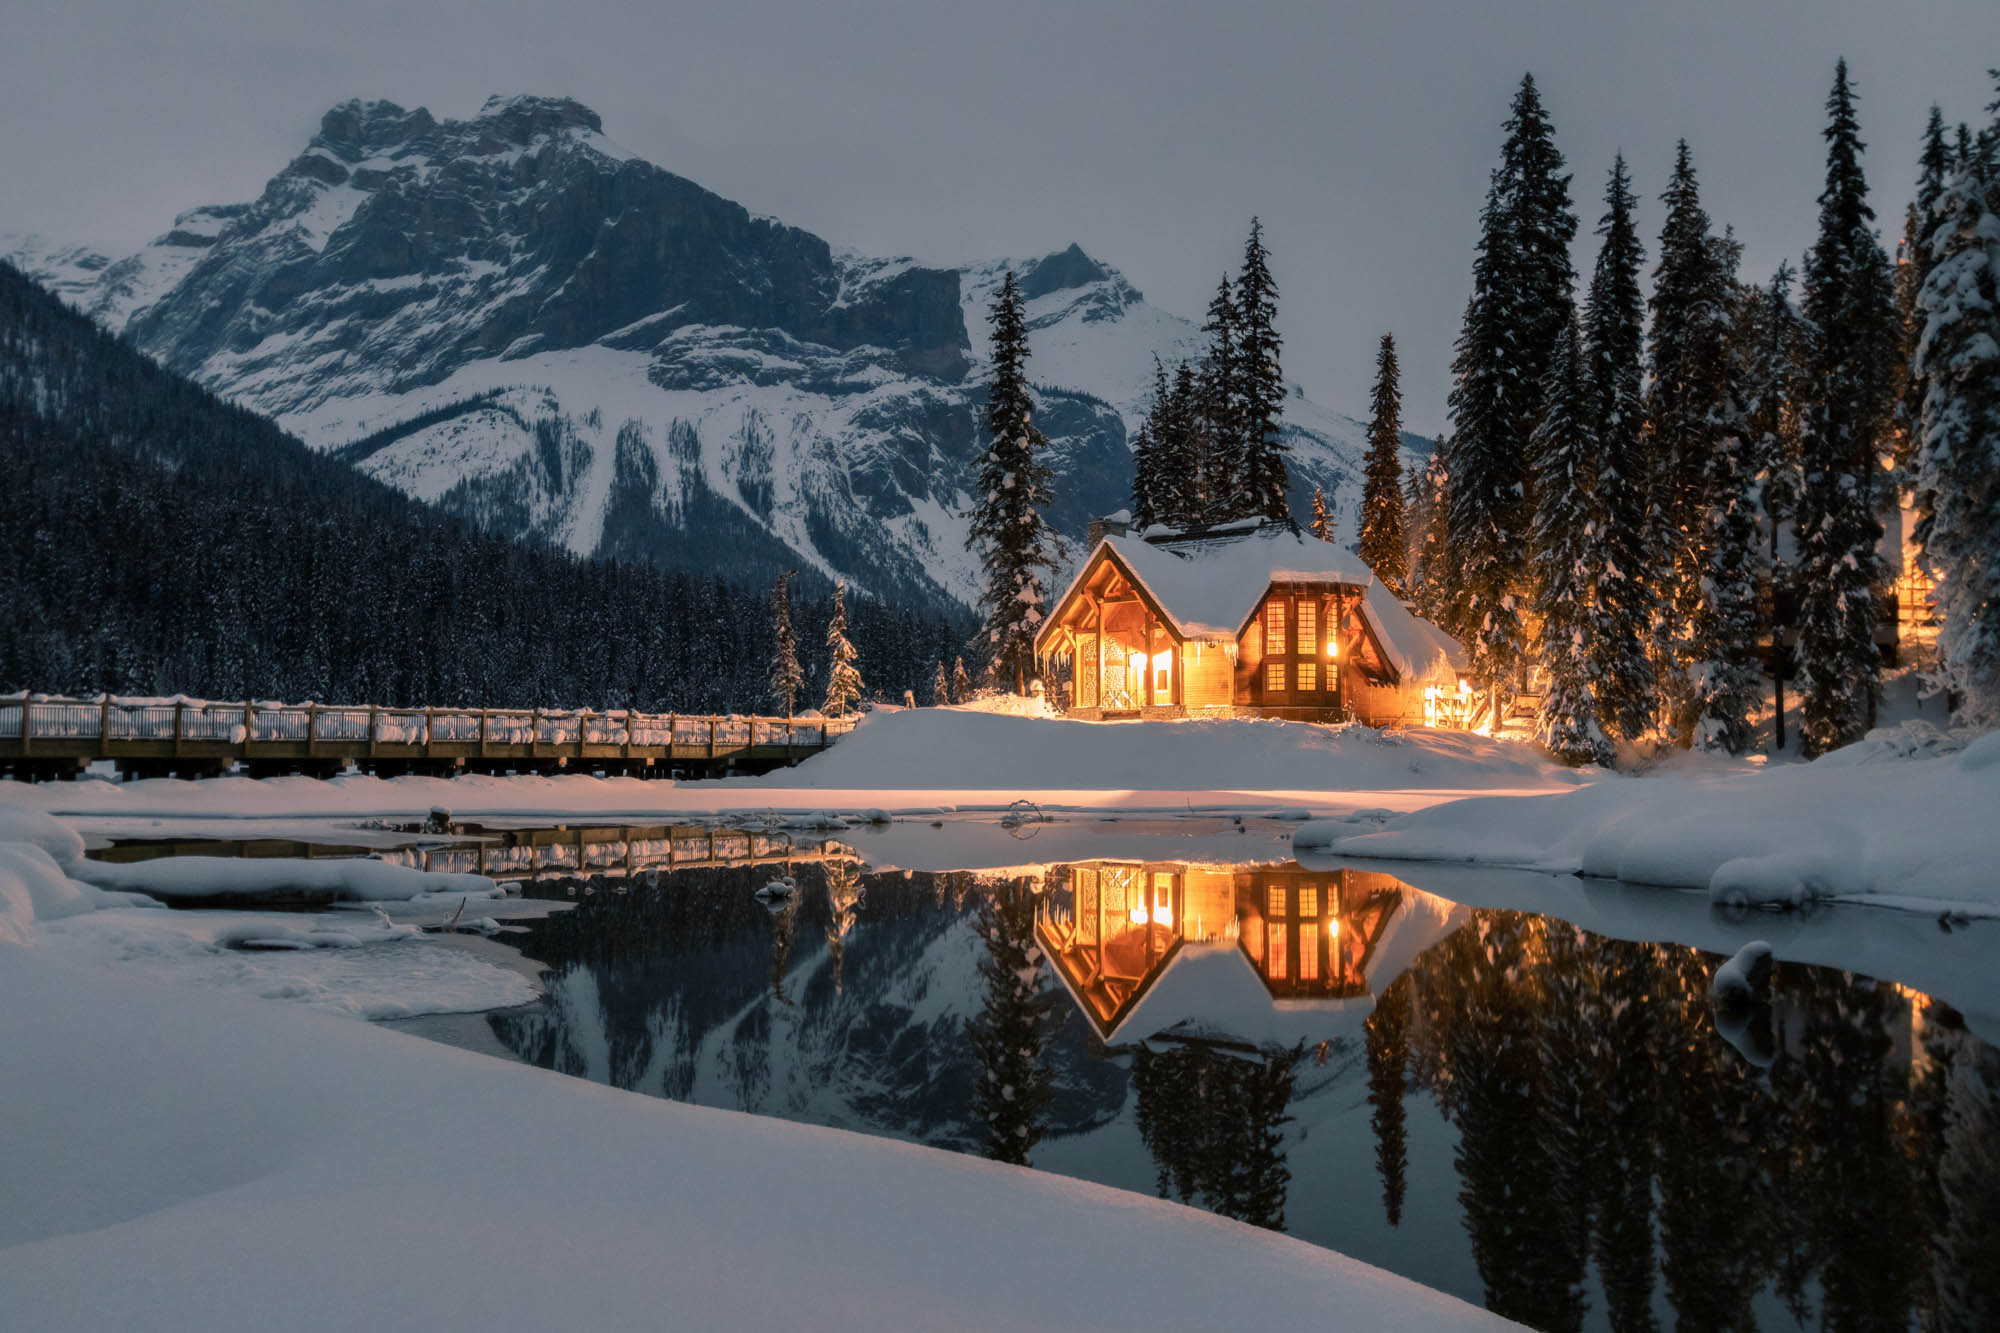 Winter Lodges That Are Both Cozy and Majestic